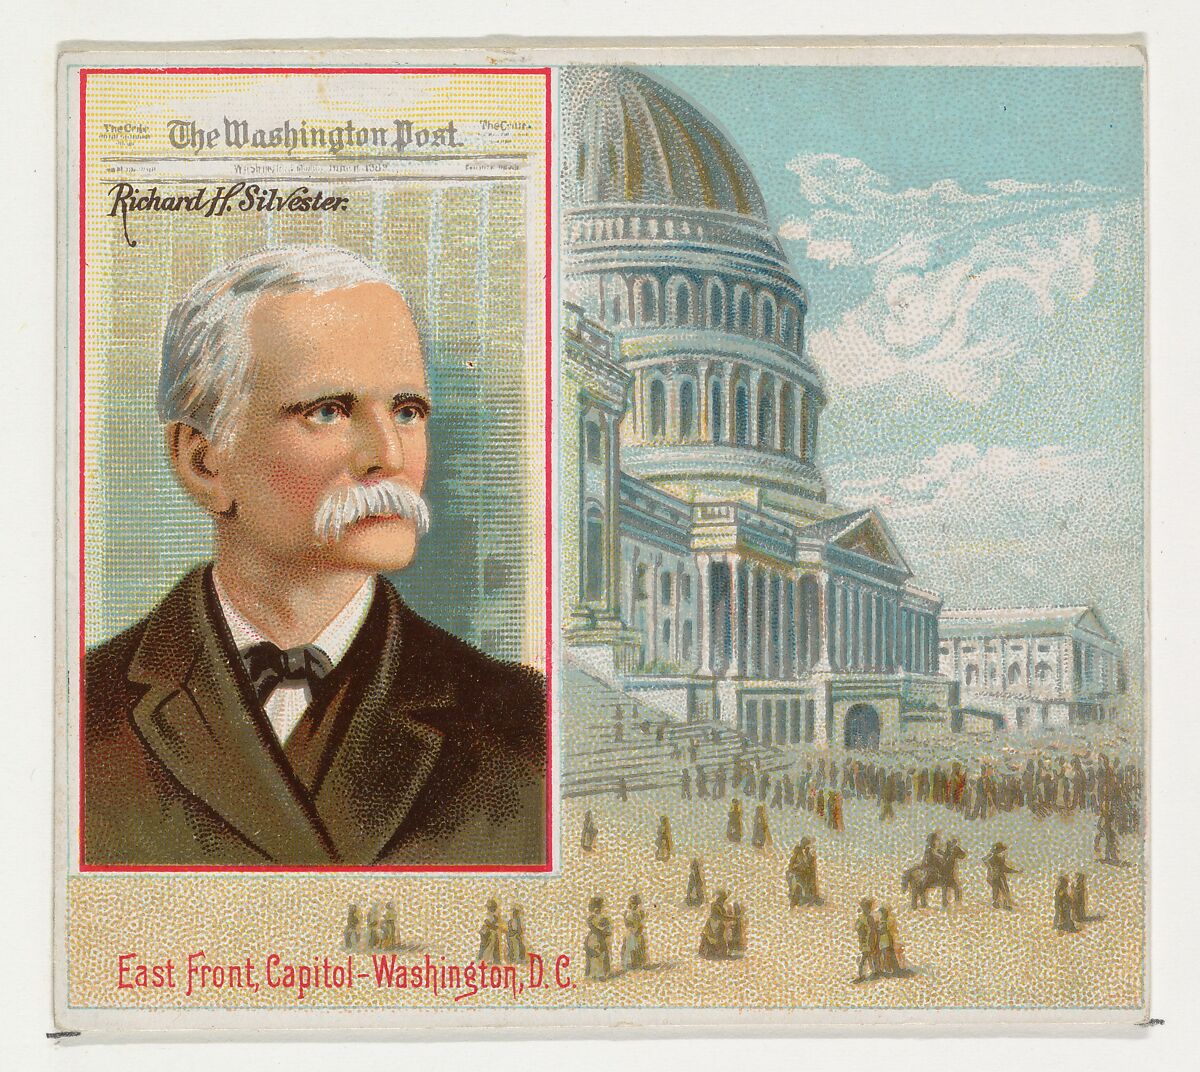 Richard H. Silvester, The Washington Post, from the American Editors series (N35) for Allen & Ginter Cigarettes, Issued by Allen &amp; Ginter (American, Richmond, Virginia), Commercial color lithograph 